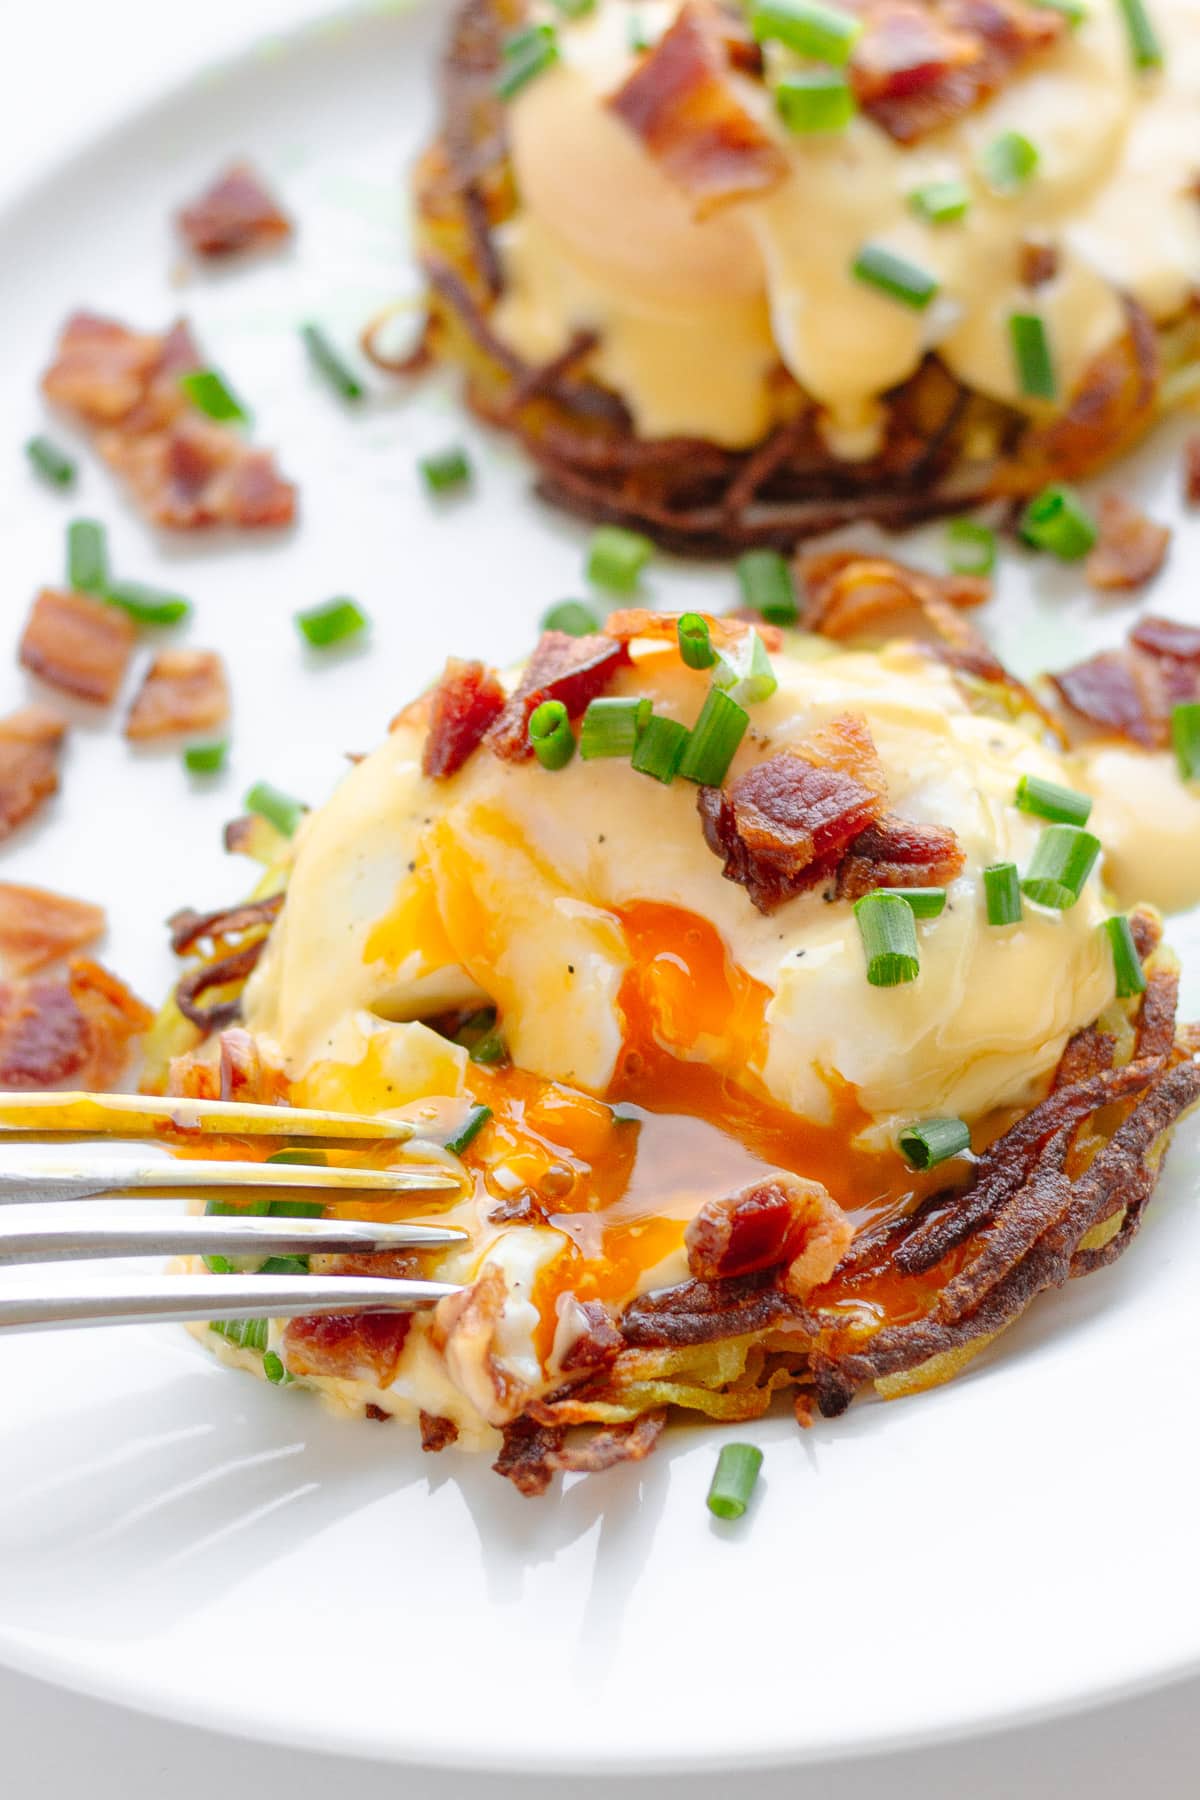 Potato rosti eggs Benedict garnished with chopped chives and crispy bacon pieces with a fork cutting into one.